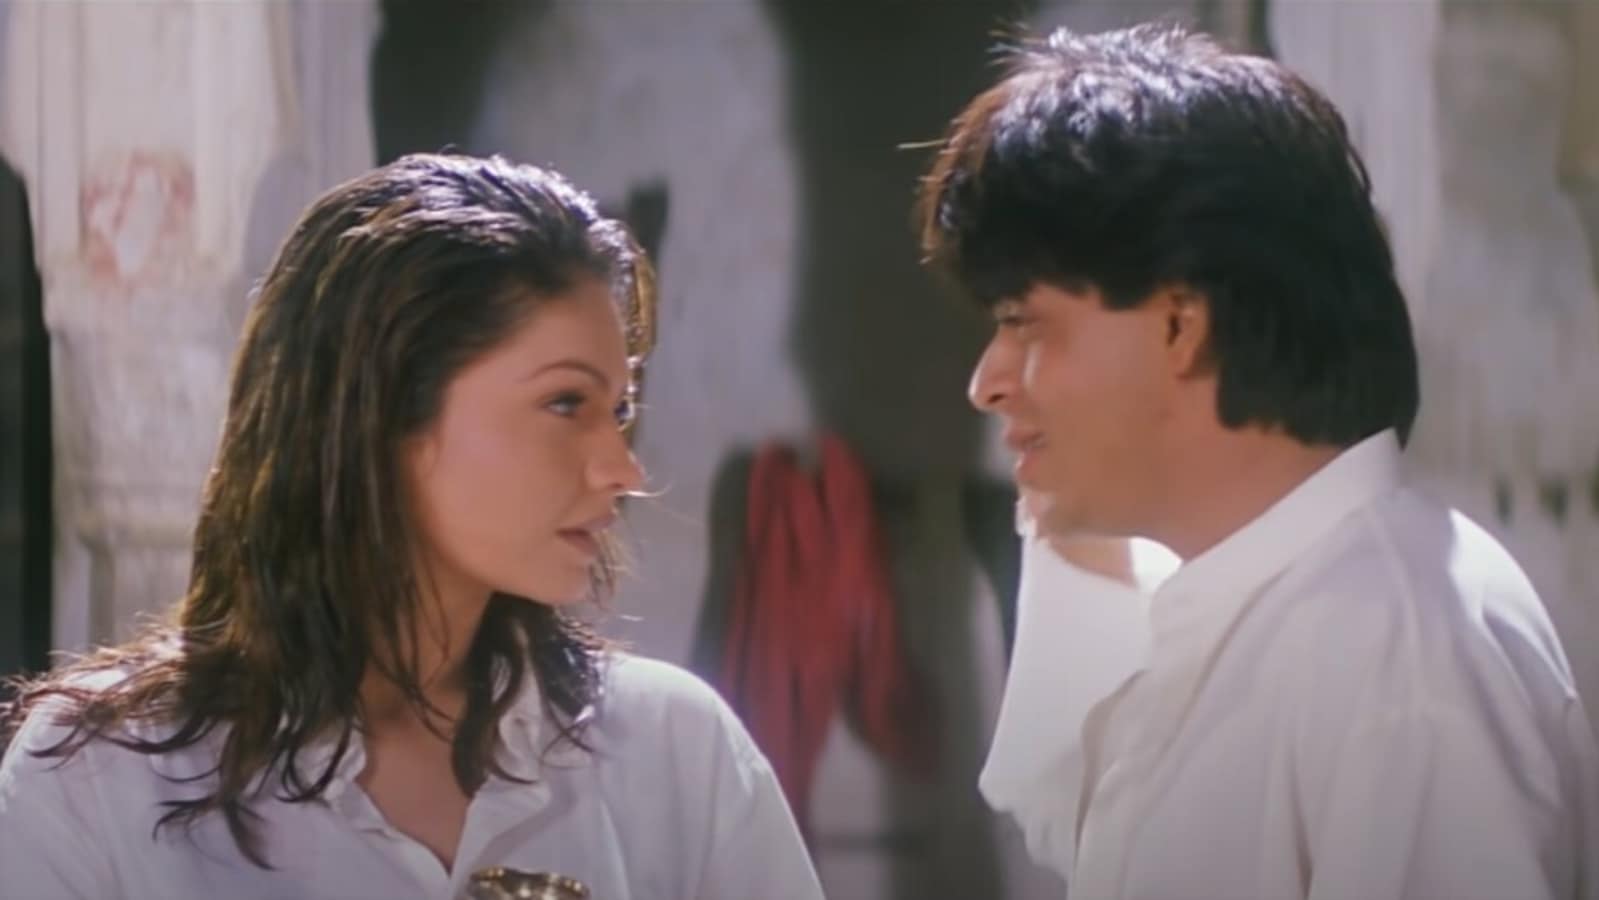 Pooja Bhatt schools Twitter user for dismissing her views: ‘You call yourself a Shah Rukh Khan fan?’